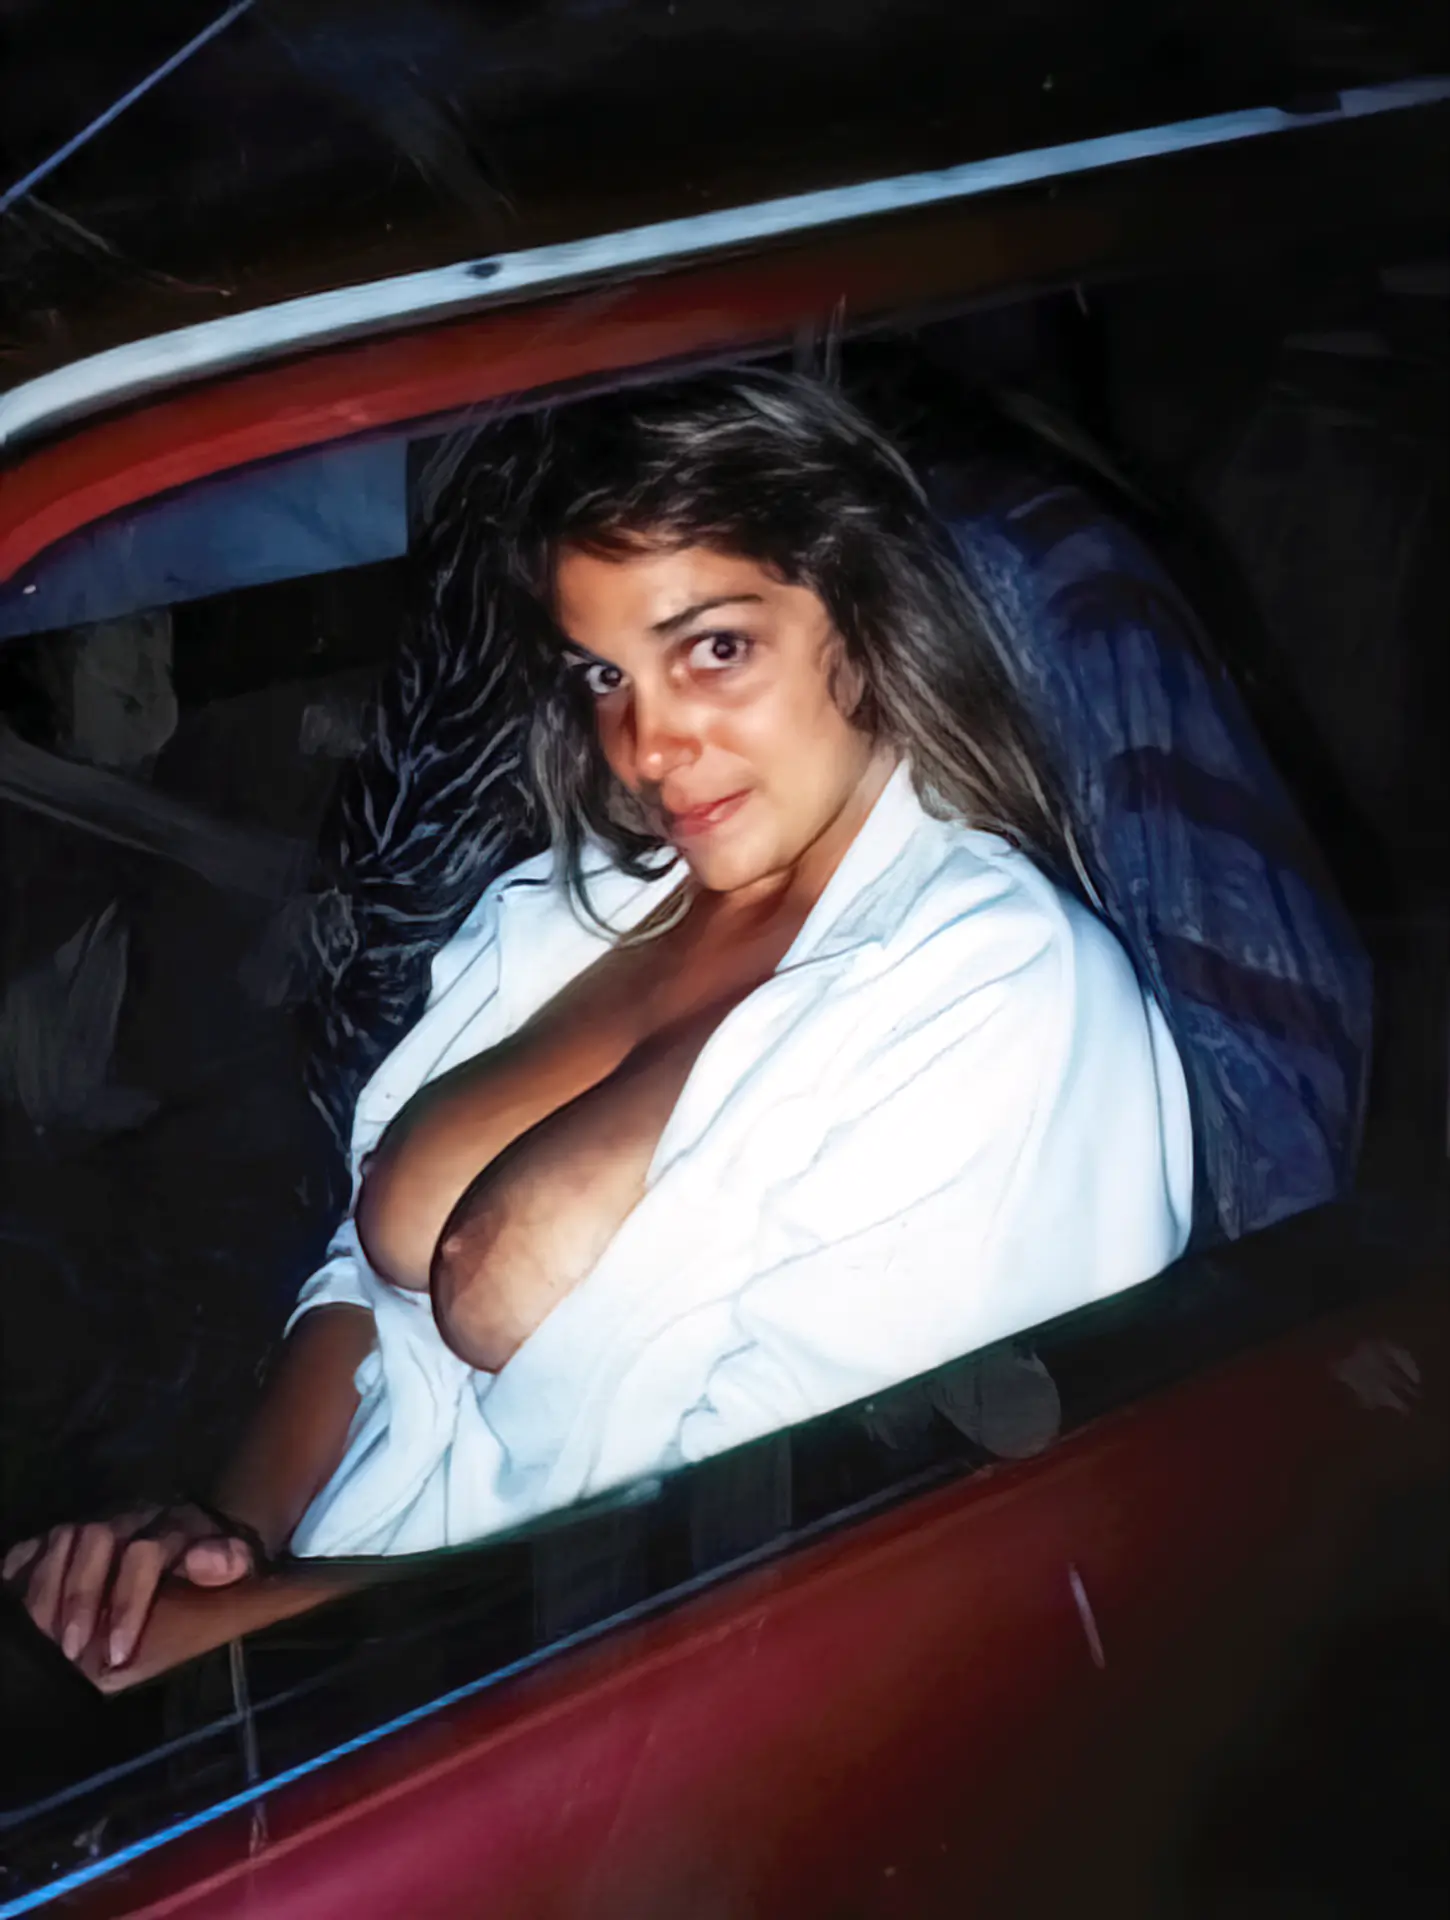 Vintage car porn photo Confused classic babe in a car exposes her bare soft breasts